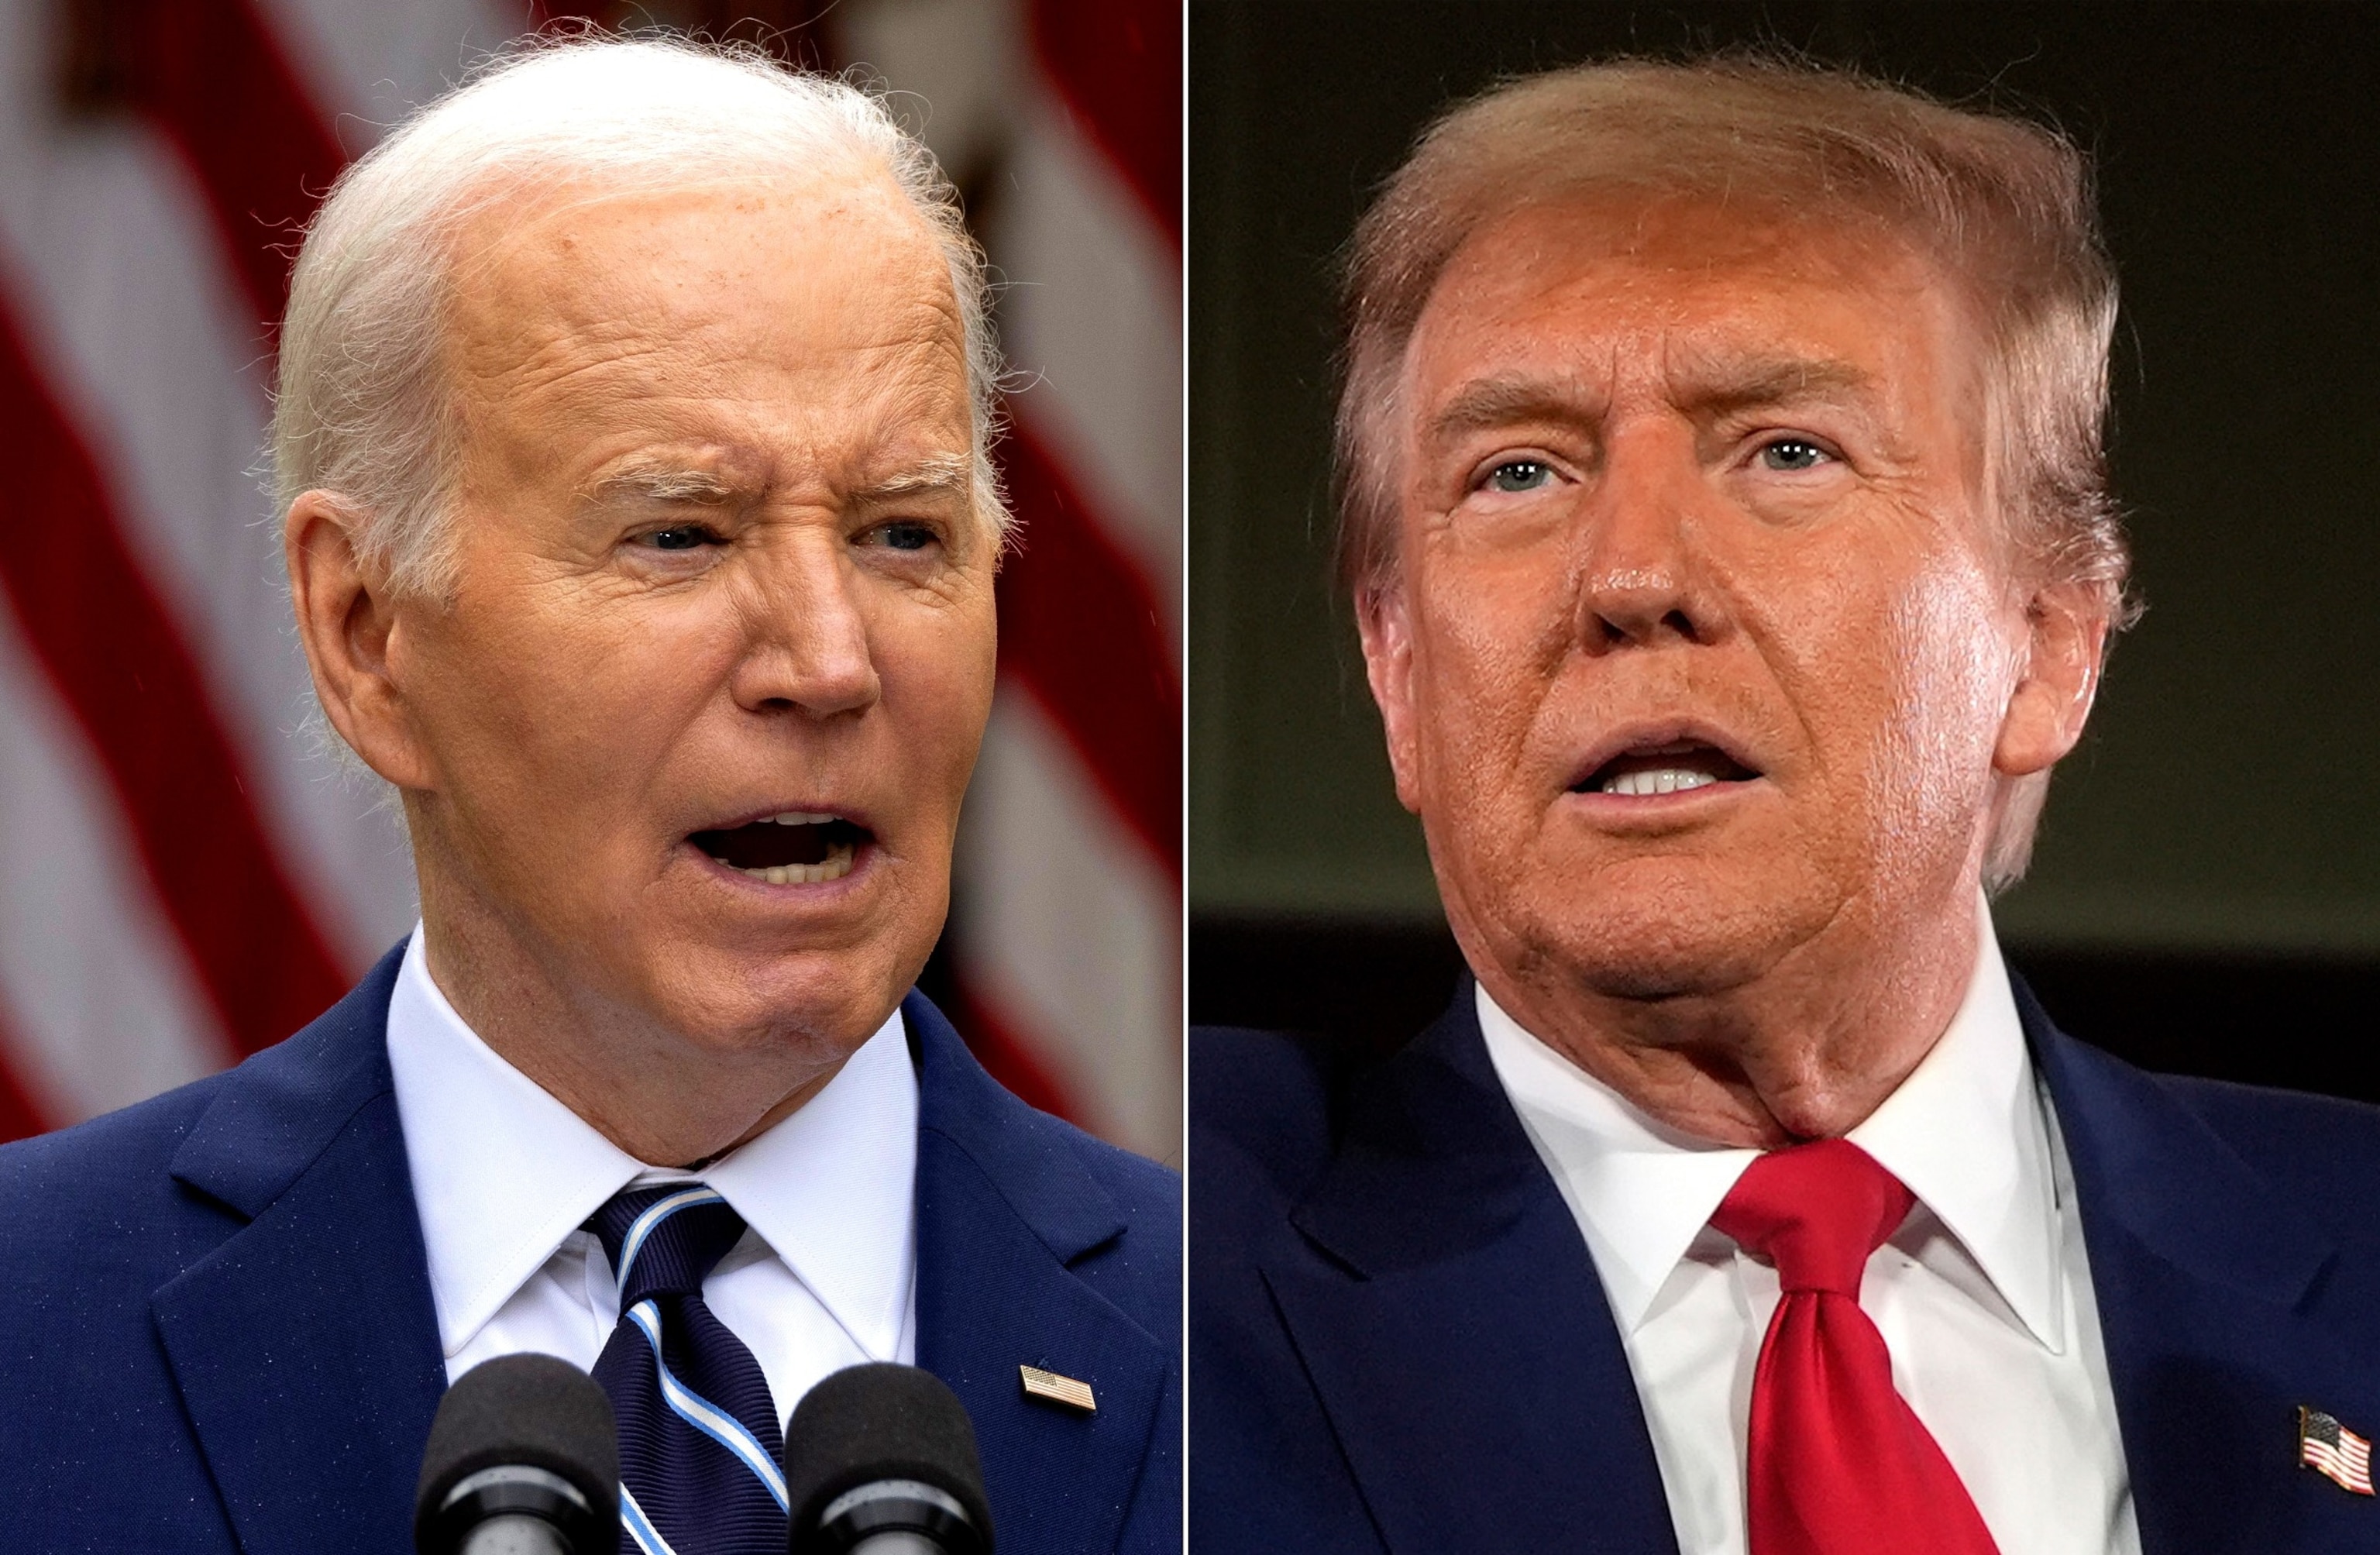 PHOTO: President Joe Biden and Donald Trump, the presumptive Republican nominee, are set to face off in an ABC News presidential debate in September.